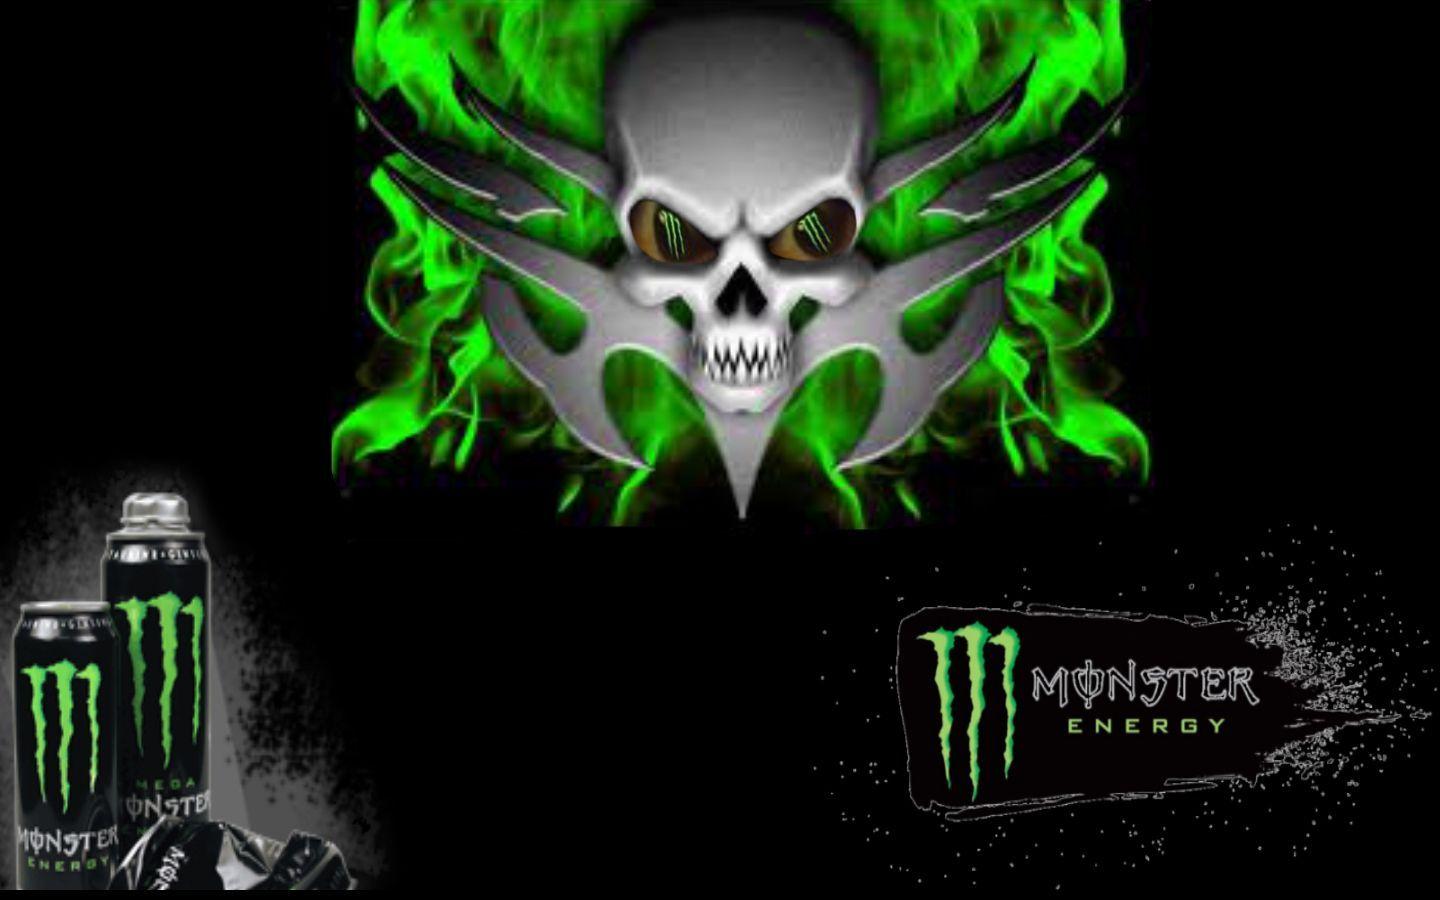 Monster Energy Wallpaper Background Image. View, download, comment, and rate Aby. Monster wallpaper, Monster picture, Cute monster wallpaper